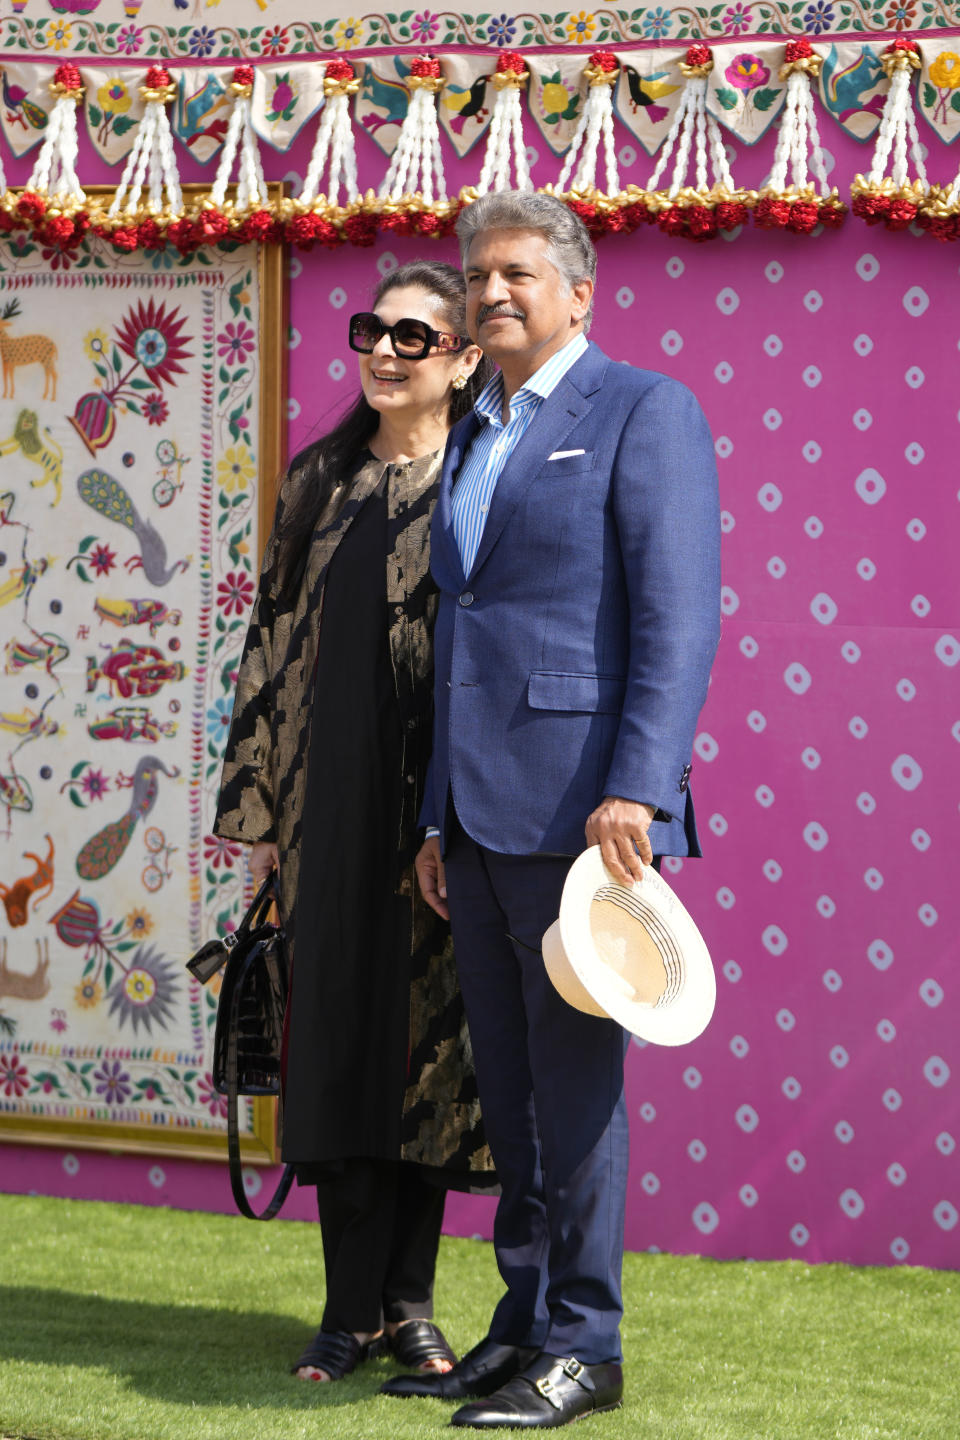 Anand Mahindra, chairperson of Mahindra and Mahindra, poses with his wife Anuradha as they arrive to attend a pre-wedding bash of billionaire industrialist Mukesh Ambani's son Anant Ambani, in Jamnagar, India, Friday, March 1, 2024. (AP Photo/Ajit Solanki)